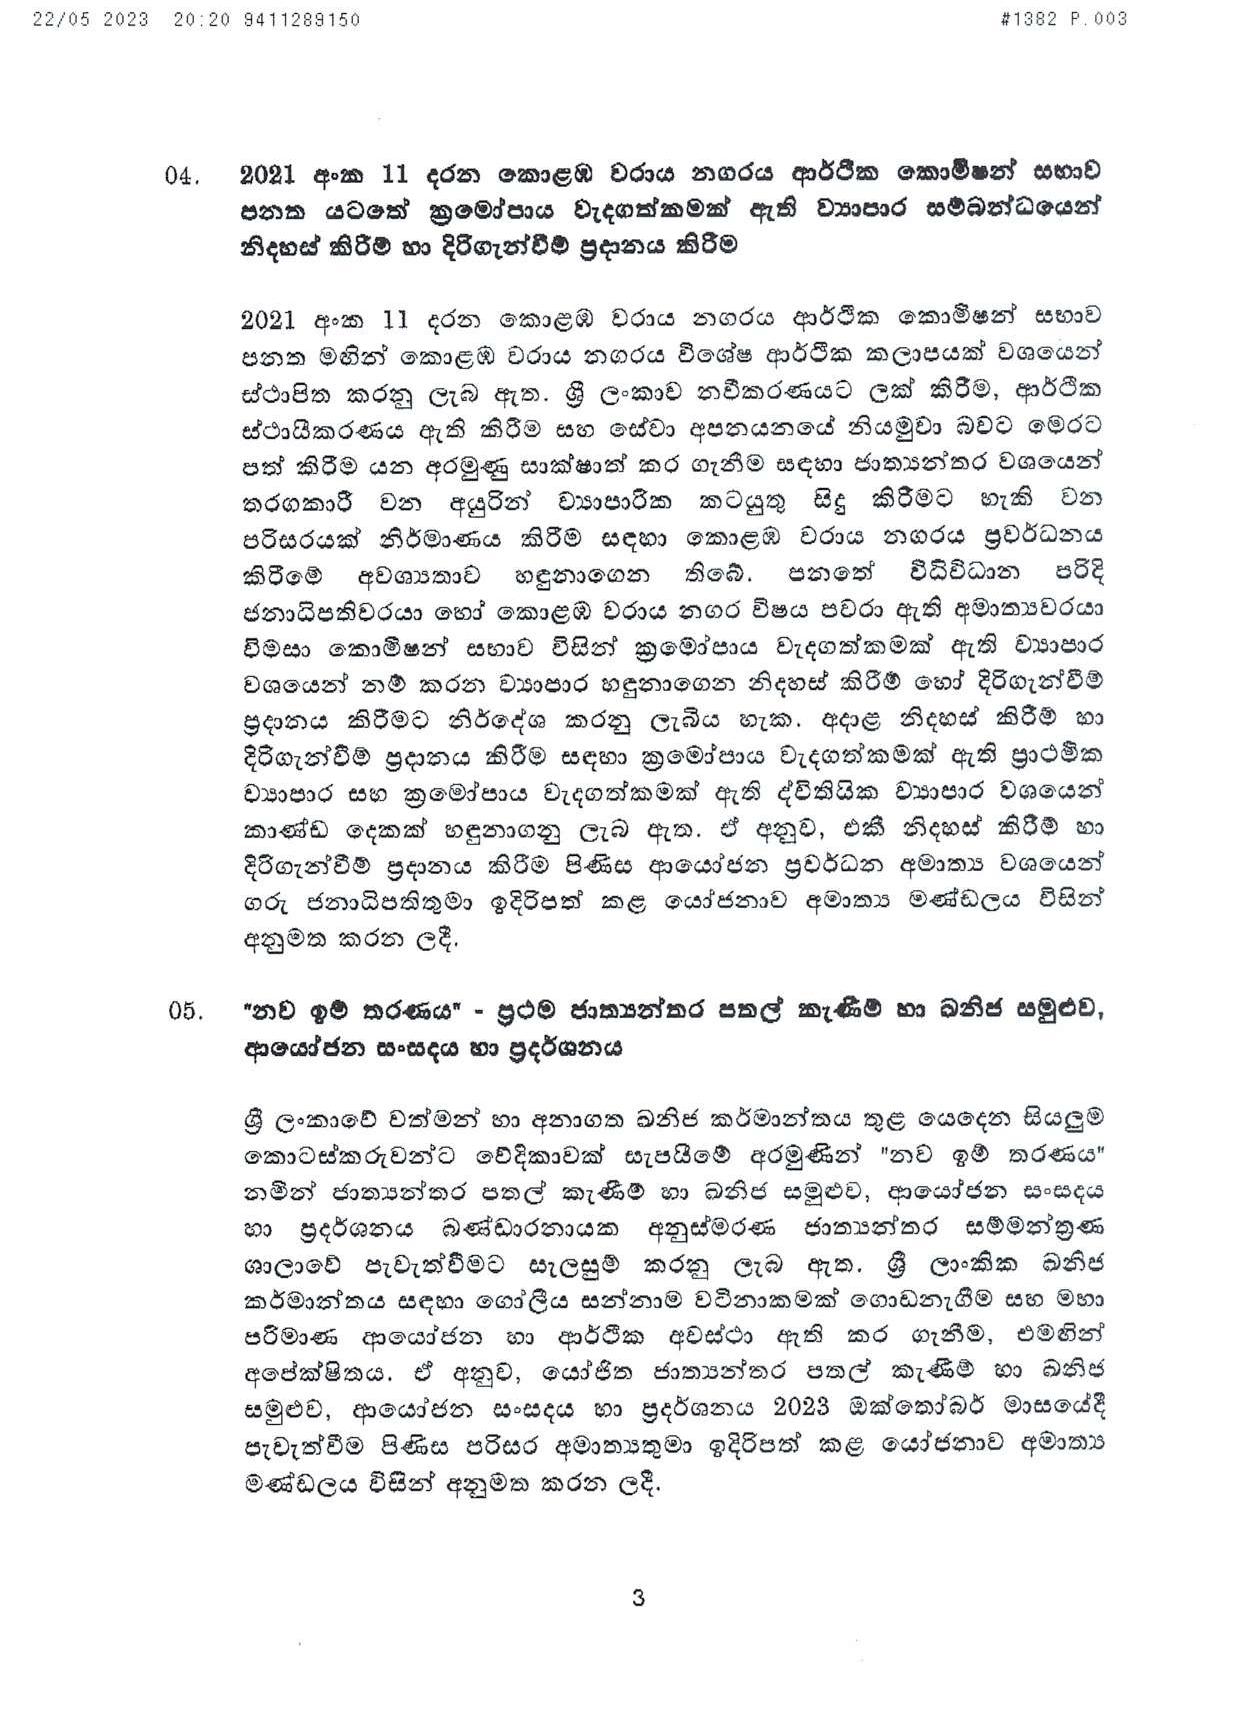 Cabinet Decisions on 22.05.2023 page 003